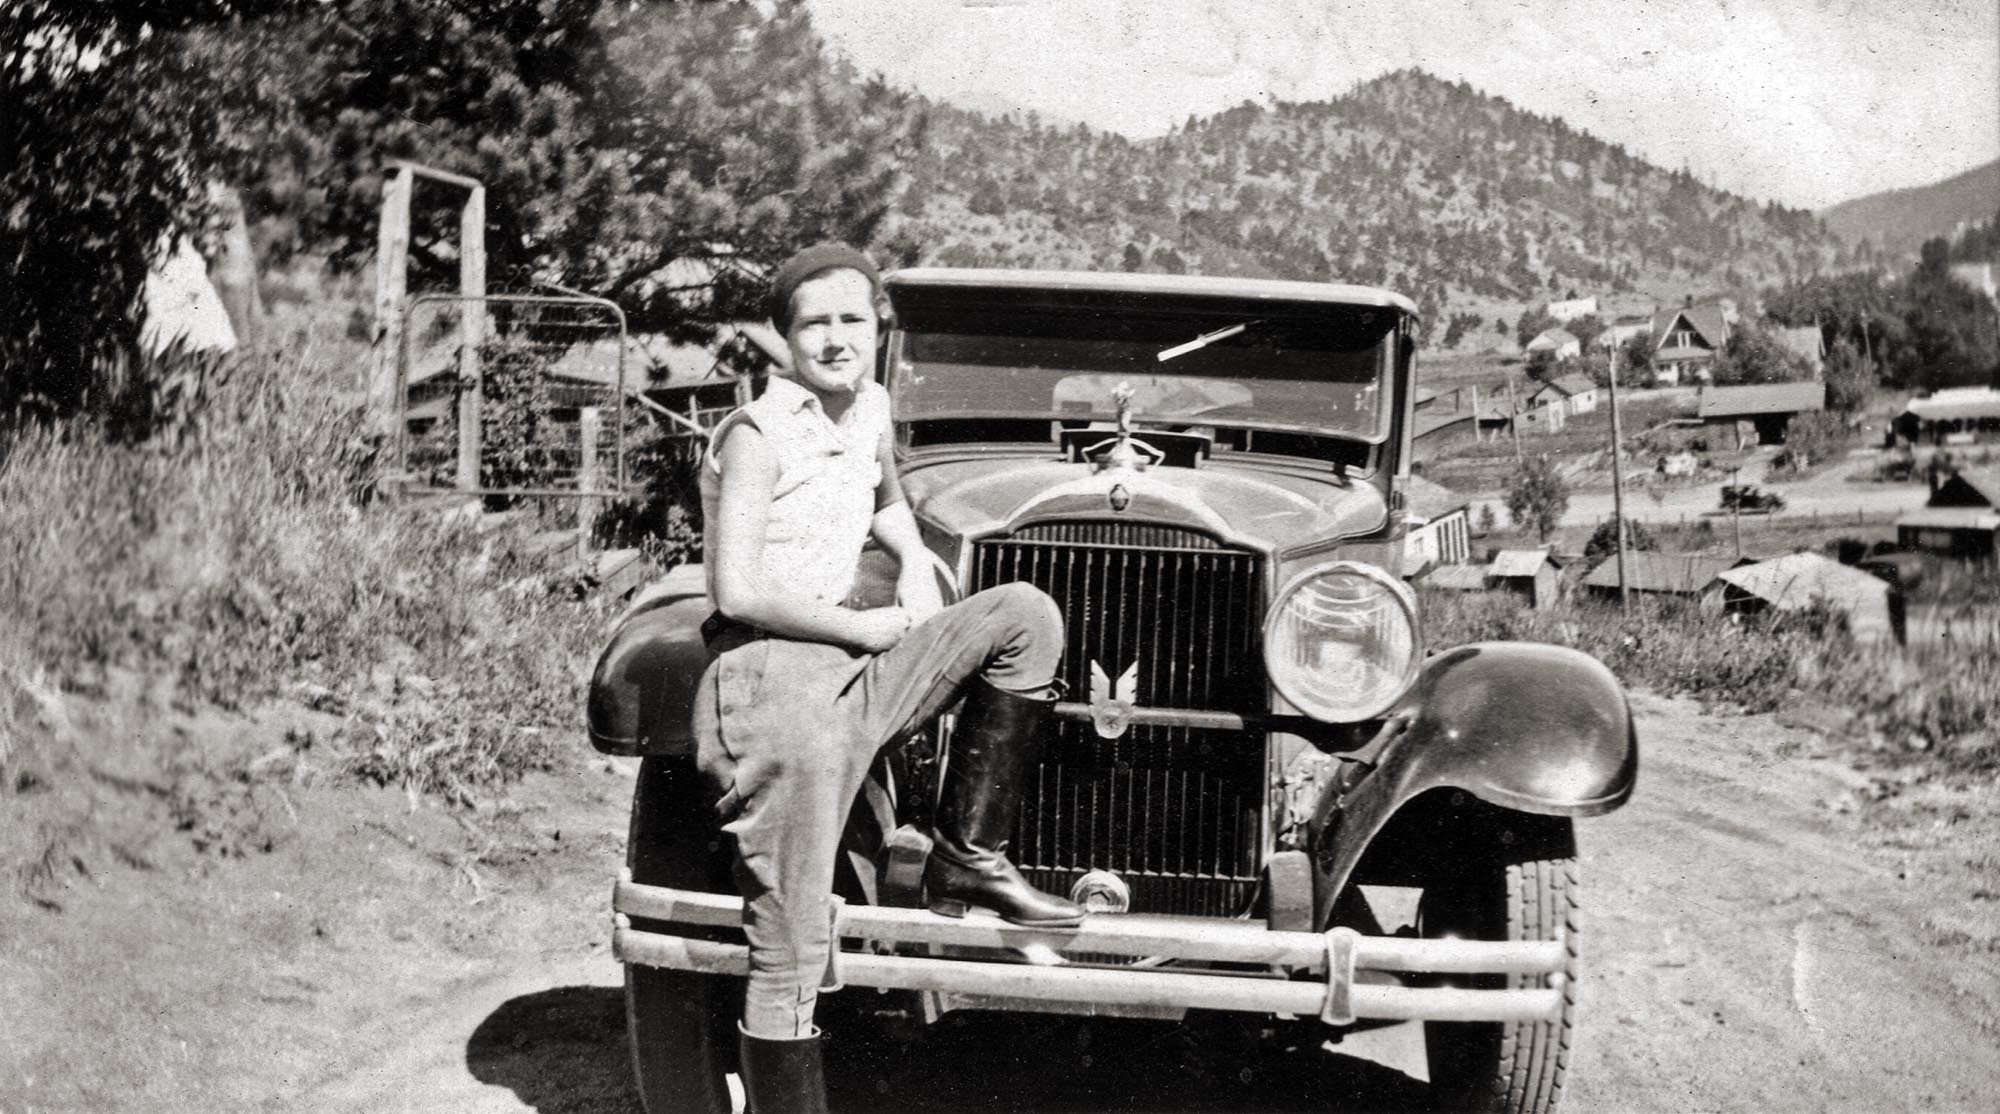 Comment on back of photo says "Evelyn Walker, Green Mountain Falls, 1931." Can anyone identify the Packard?